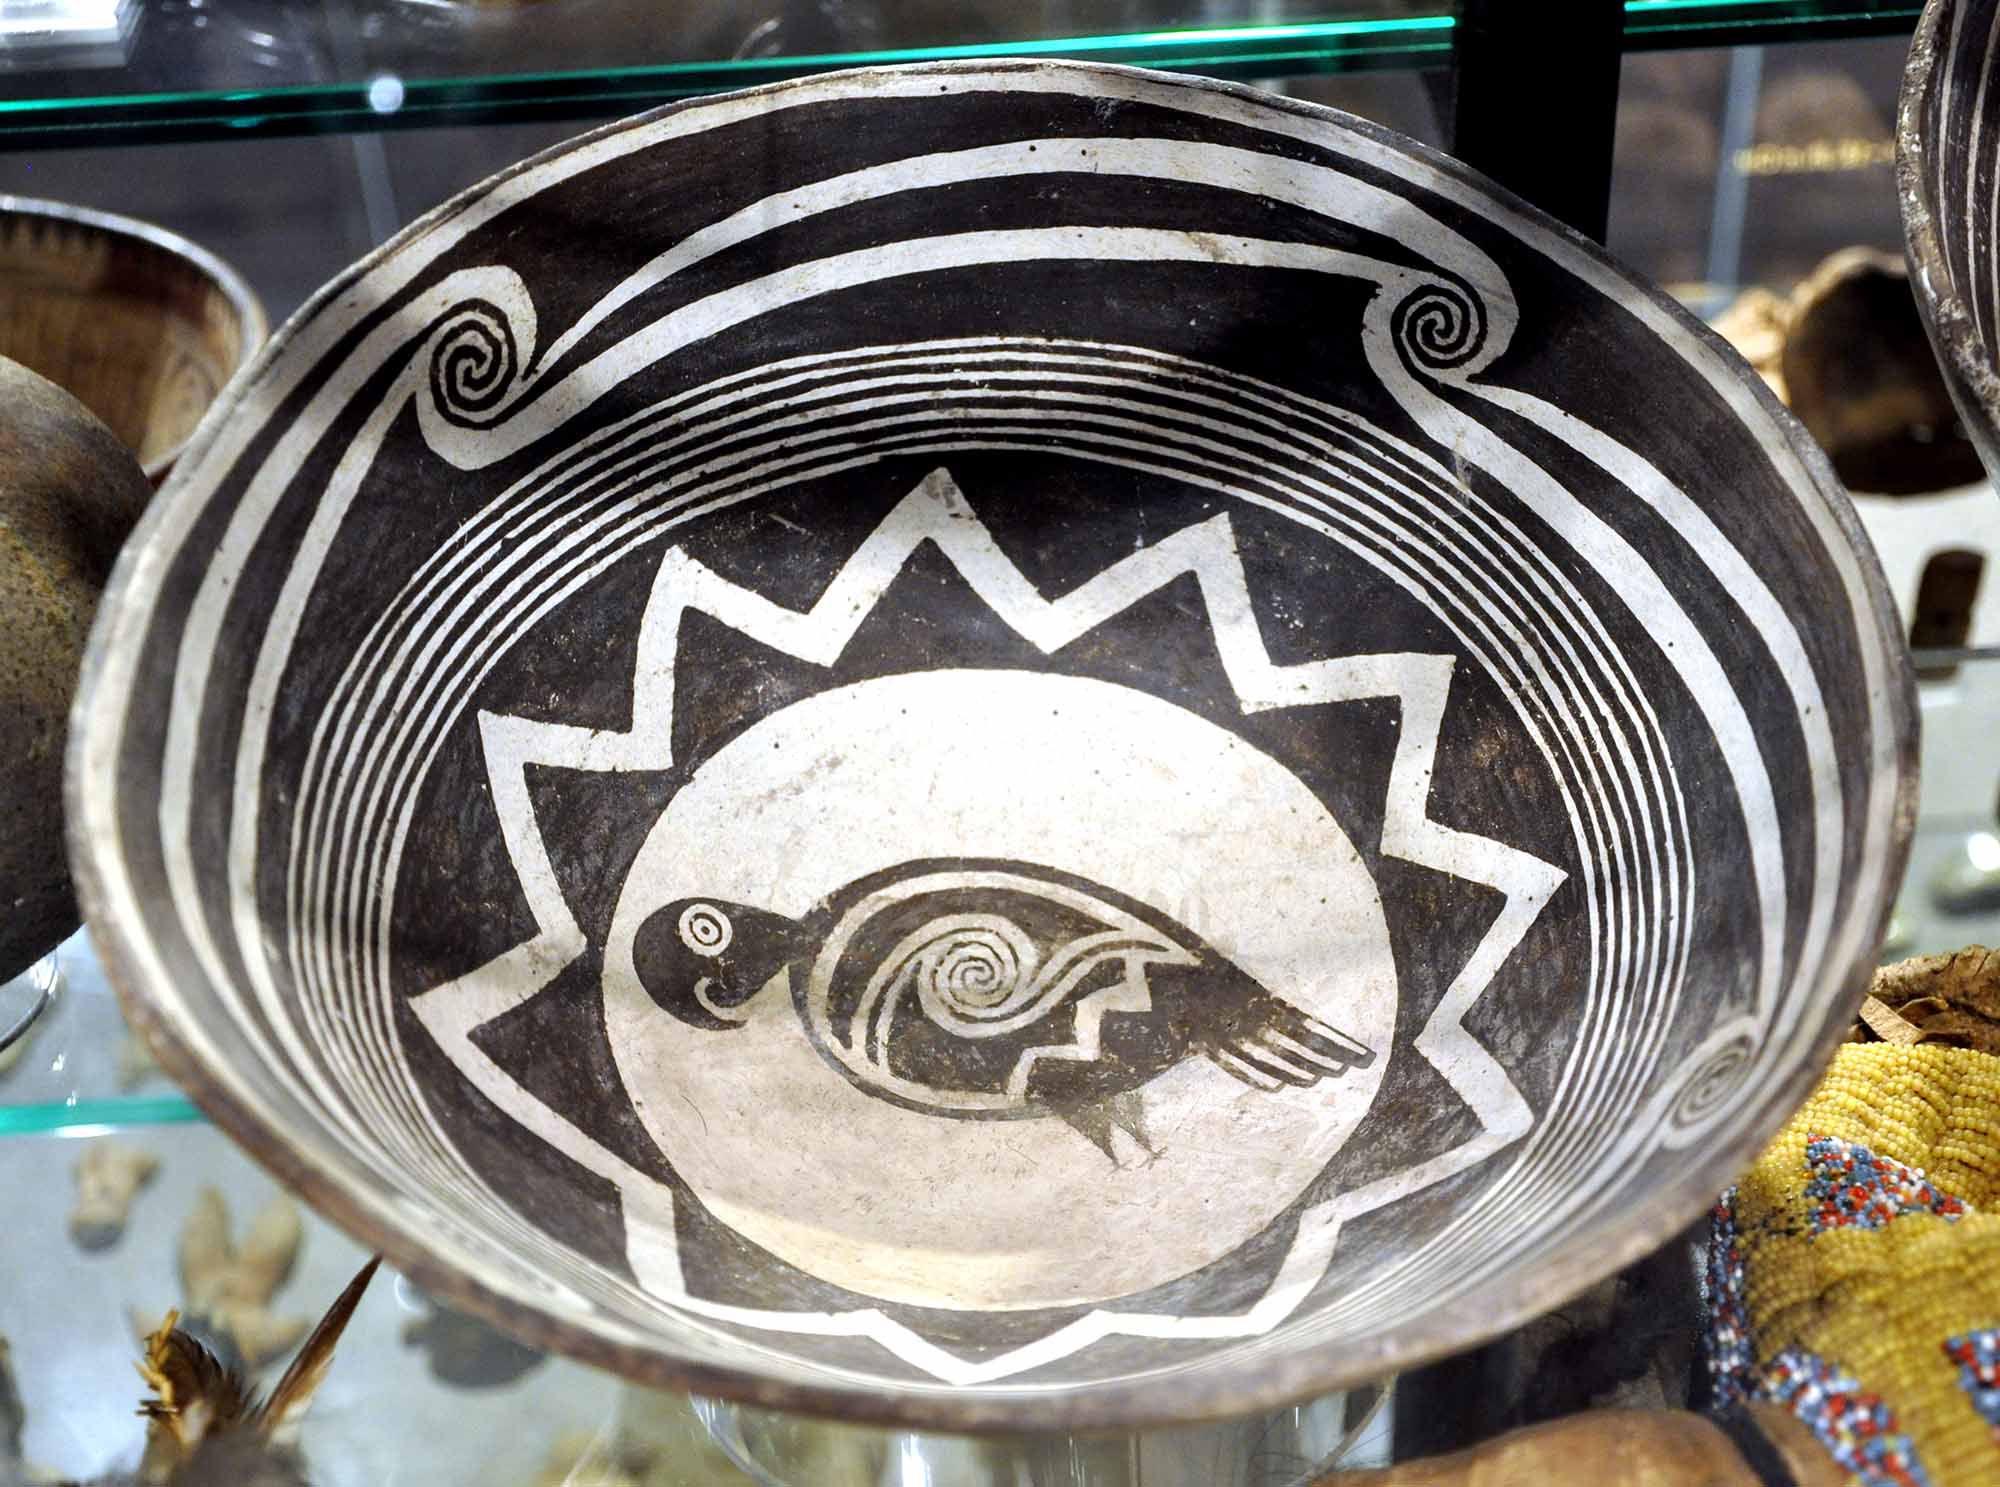 Mimbres Pottery